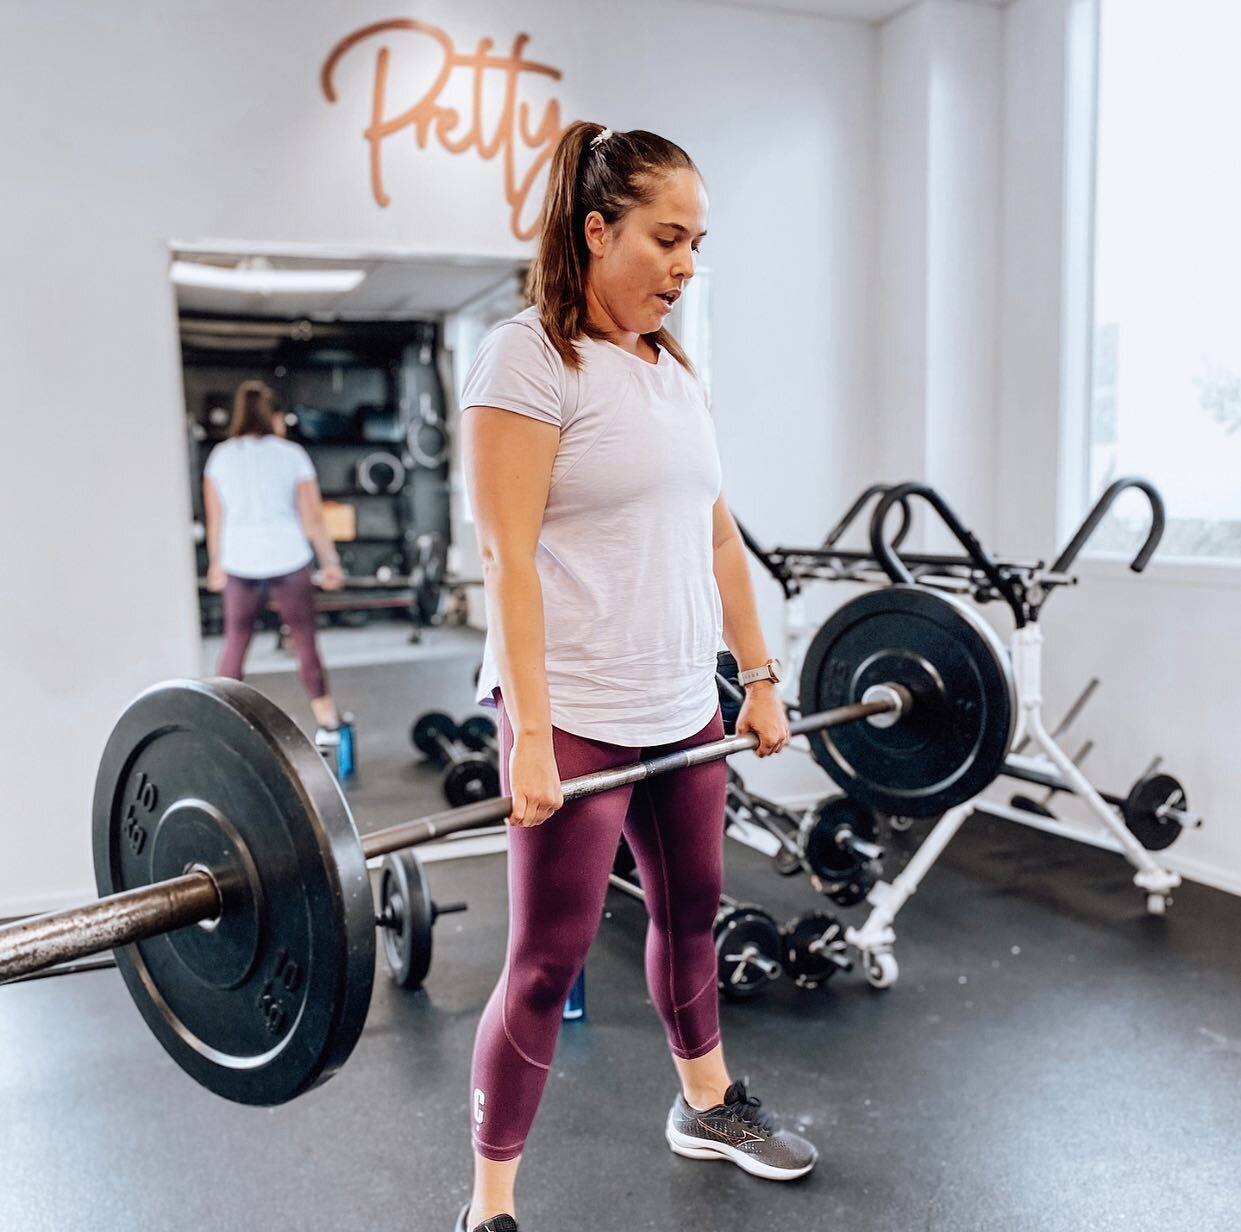 WHY YOU SHOULD DEADLIFT
👉🏼Build Muscle
👉🏼Burn Fat
👉🏼Improve Posture 
👉🏼Utilise Many Muscles
👉🏼Improve Mobility
👉🏼Increase Strength
👉🏼Strengthen the Core

As if feeling like a badass when you hit the top of a deadlift isn&rsquo;t enough 